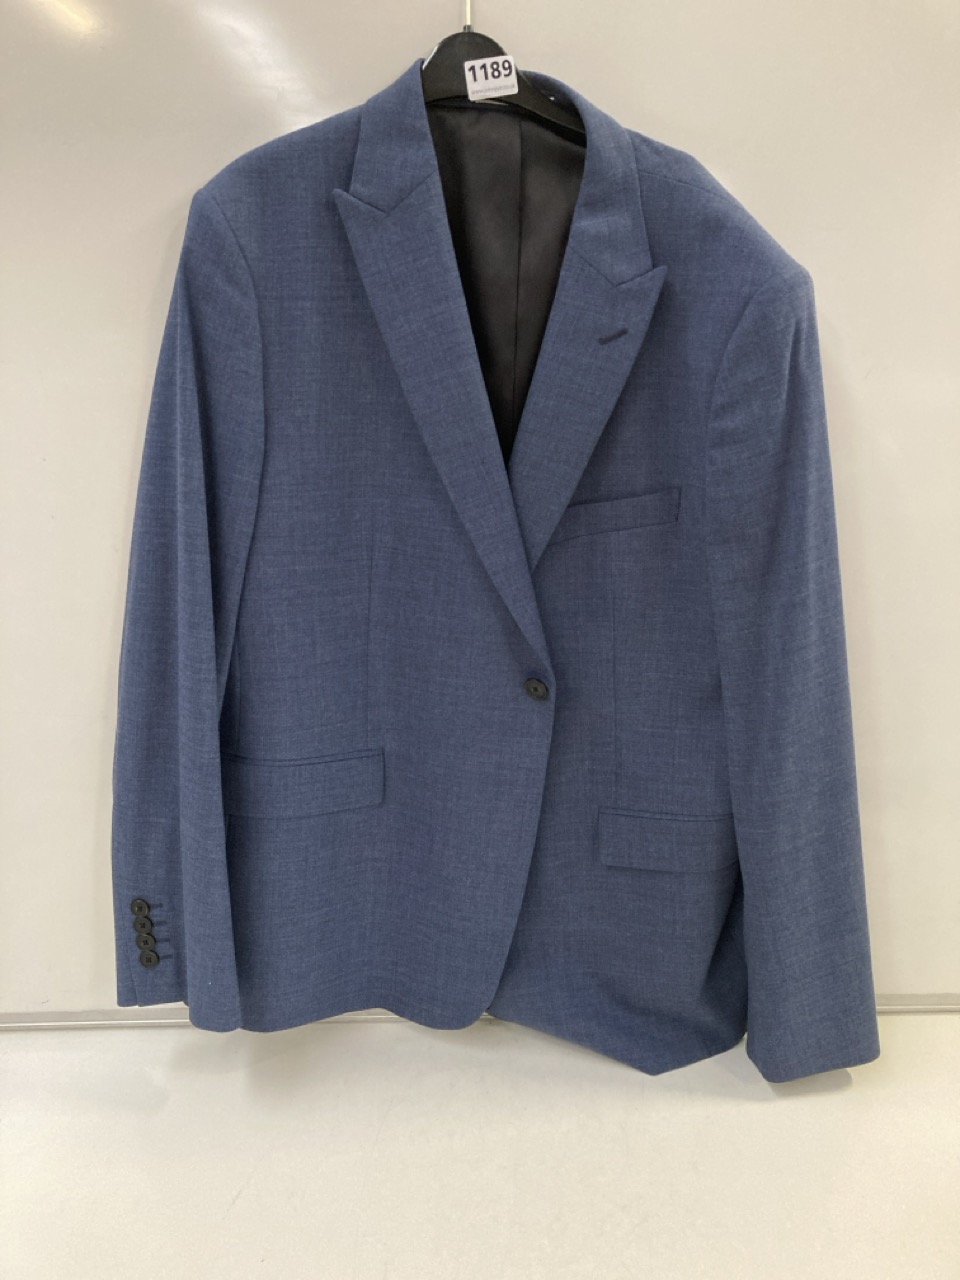 2 X MEN'S SUIT JACKETS TO INCLUDE JOHN LEWIS WOOL MOHAIR IN BLUE 44L